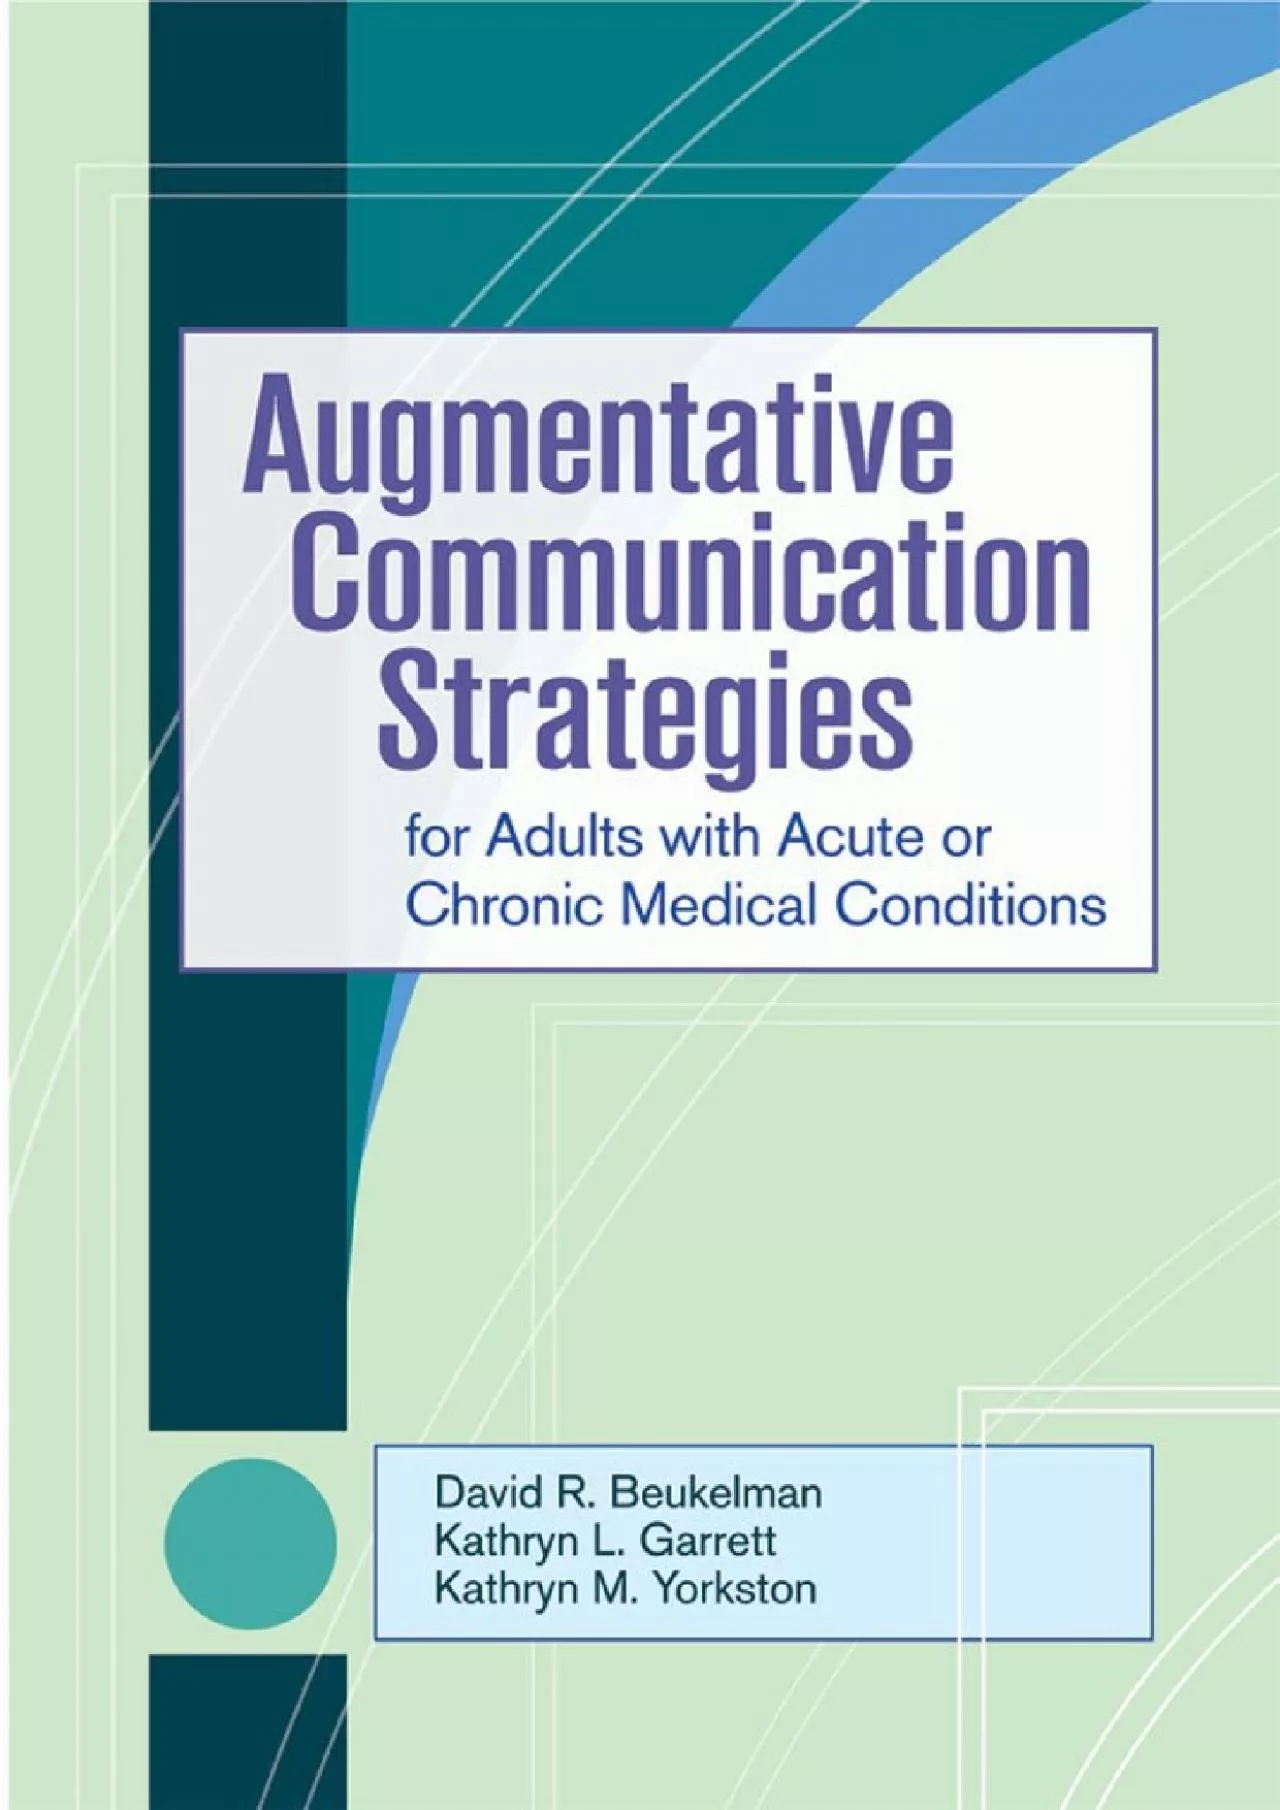 (DOWNLOAD)-Augmentative Communication Strategies for Adults with Acute or Chronic Medical